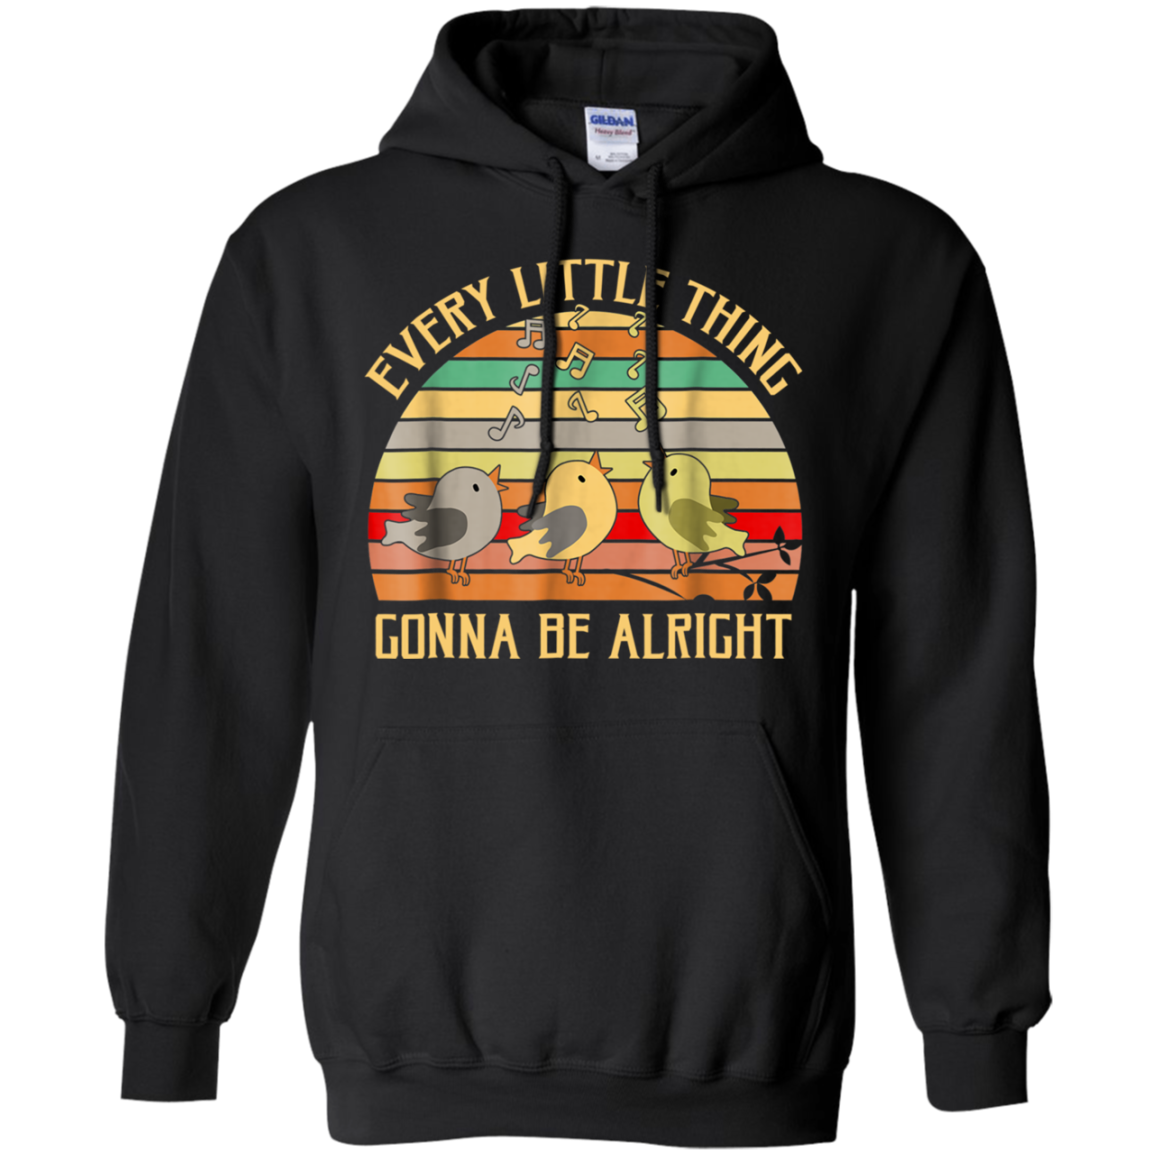 Every Little Thing Is Gonna Be Alright Bird T-shirt G185 Pullover 8 Oz.